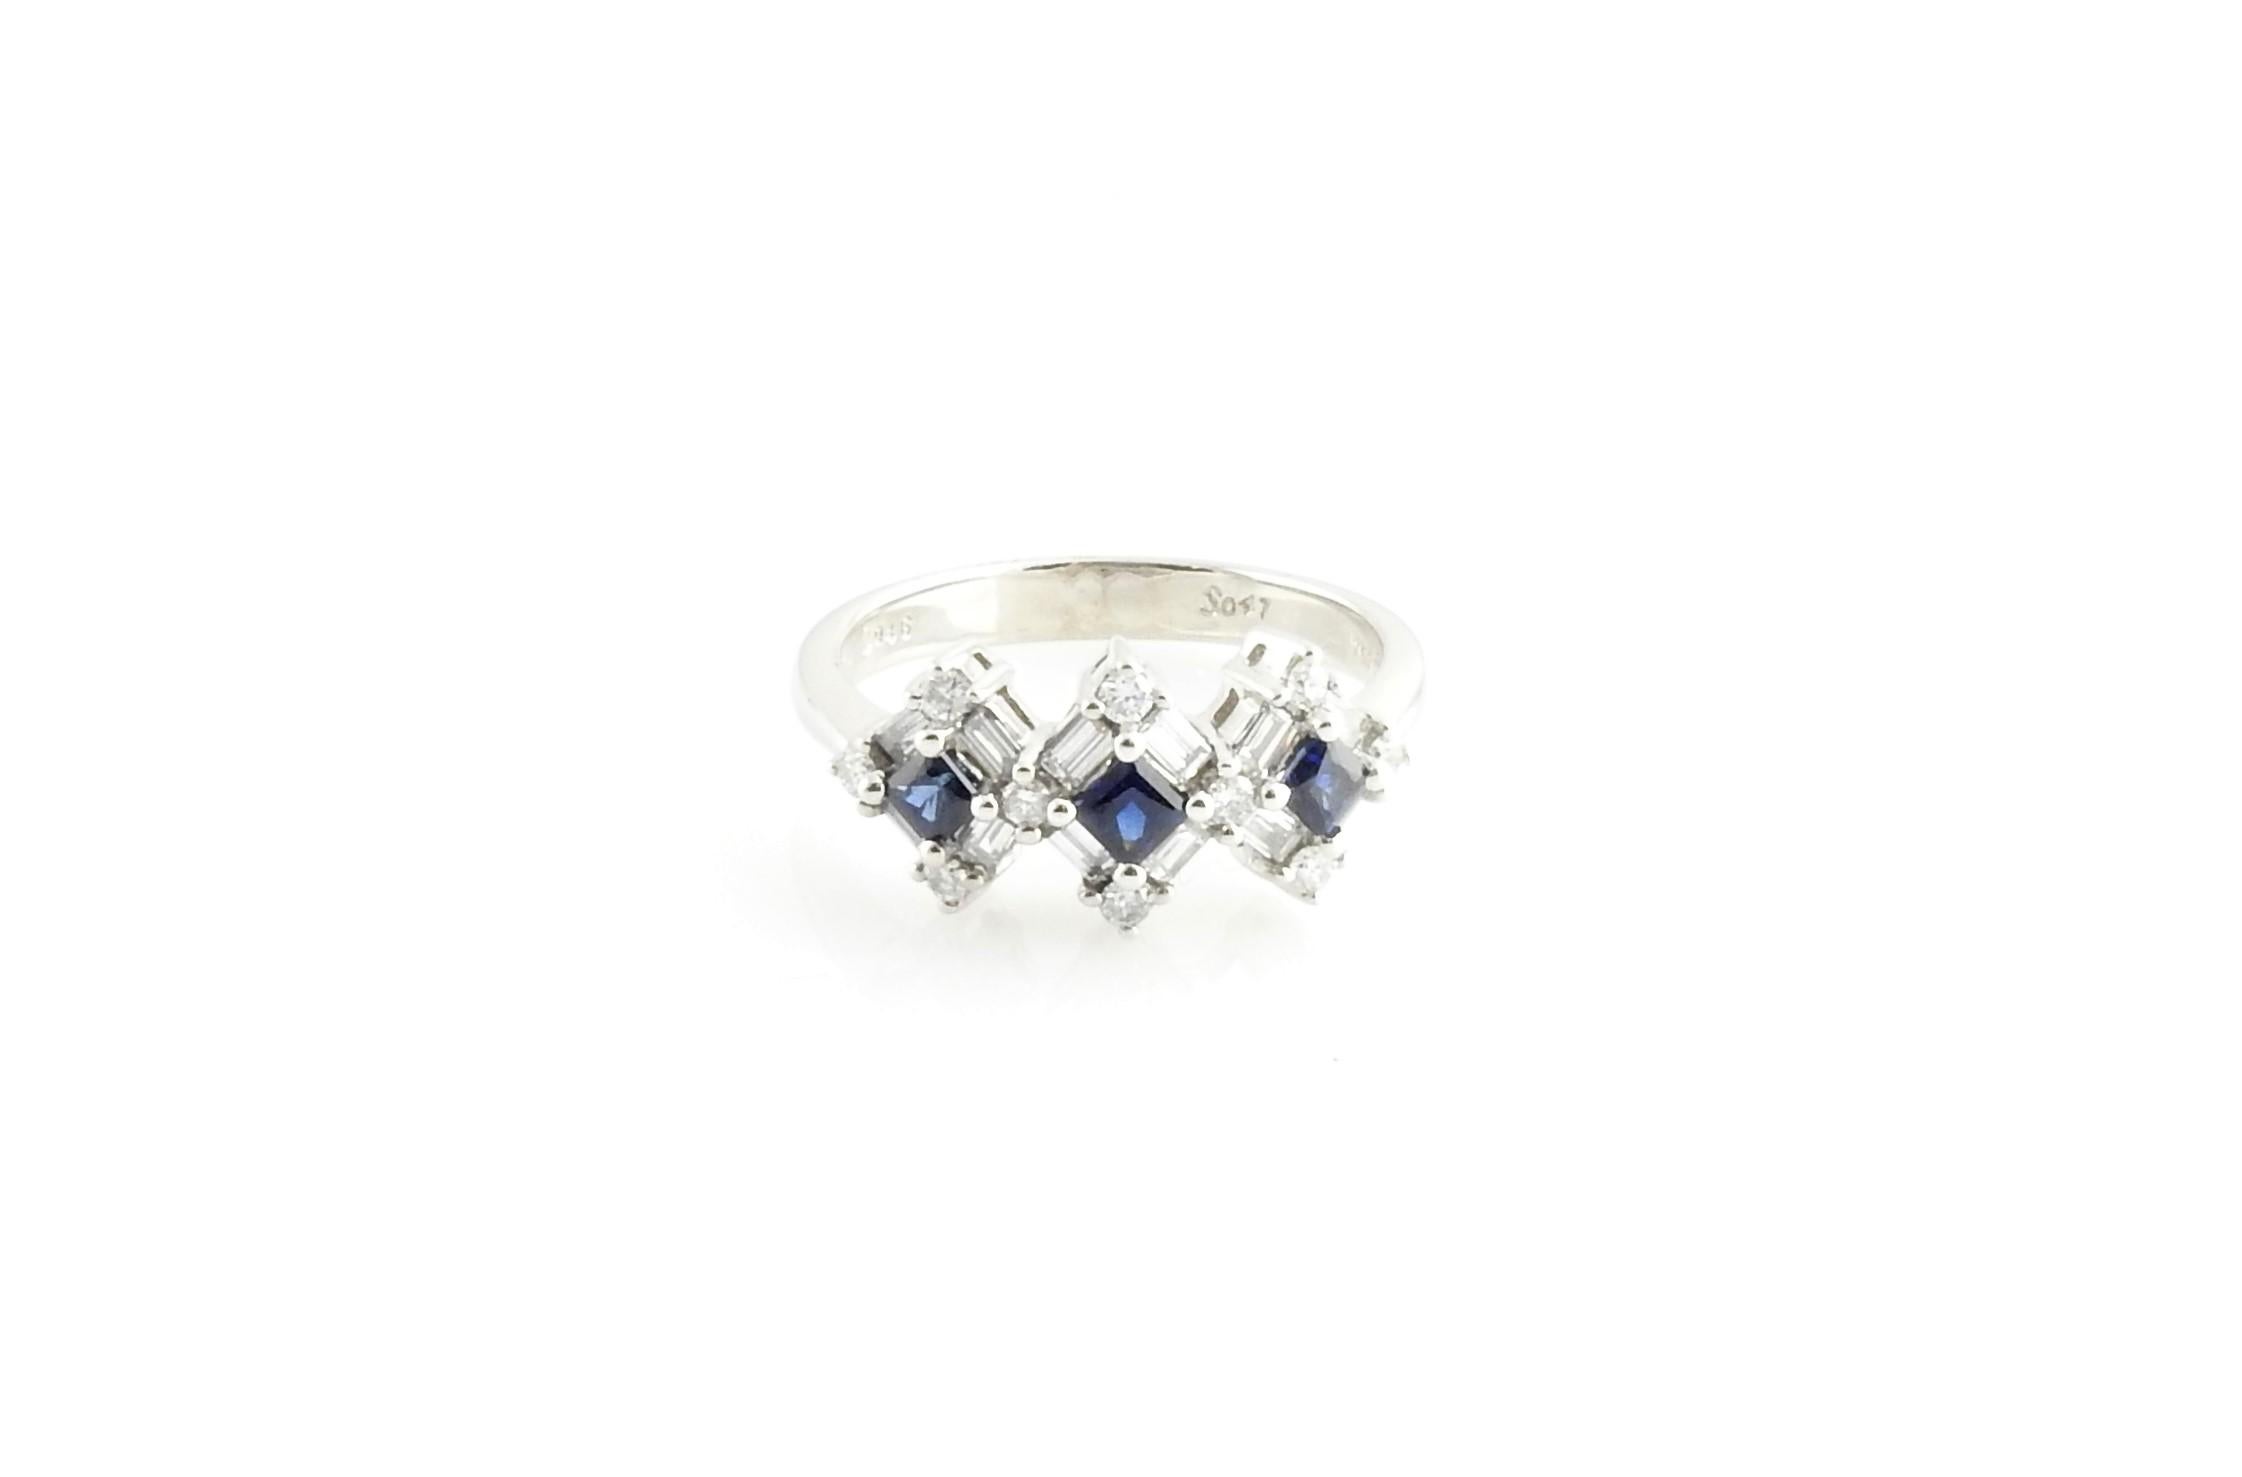 Vintage 18 Karat White Gold Natural Sapphire and Diamond Ring Size 6.75

This sparkling ring features ten round brilliant cut diamonds, 12 baguette diamonds and three square sapphires set in beautifully detailed

18K white gold.

Width: 9 mm. Shank: